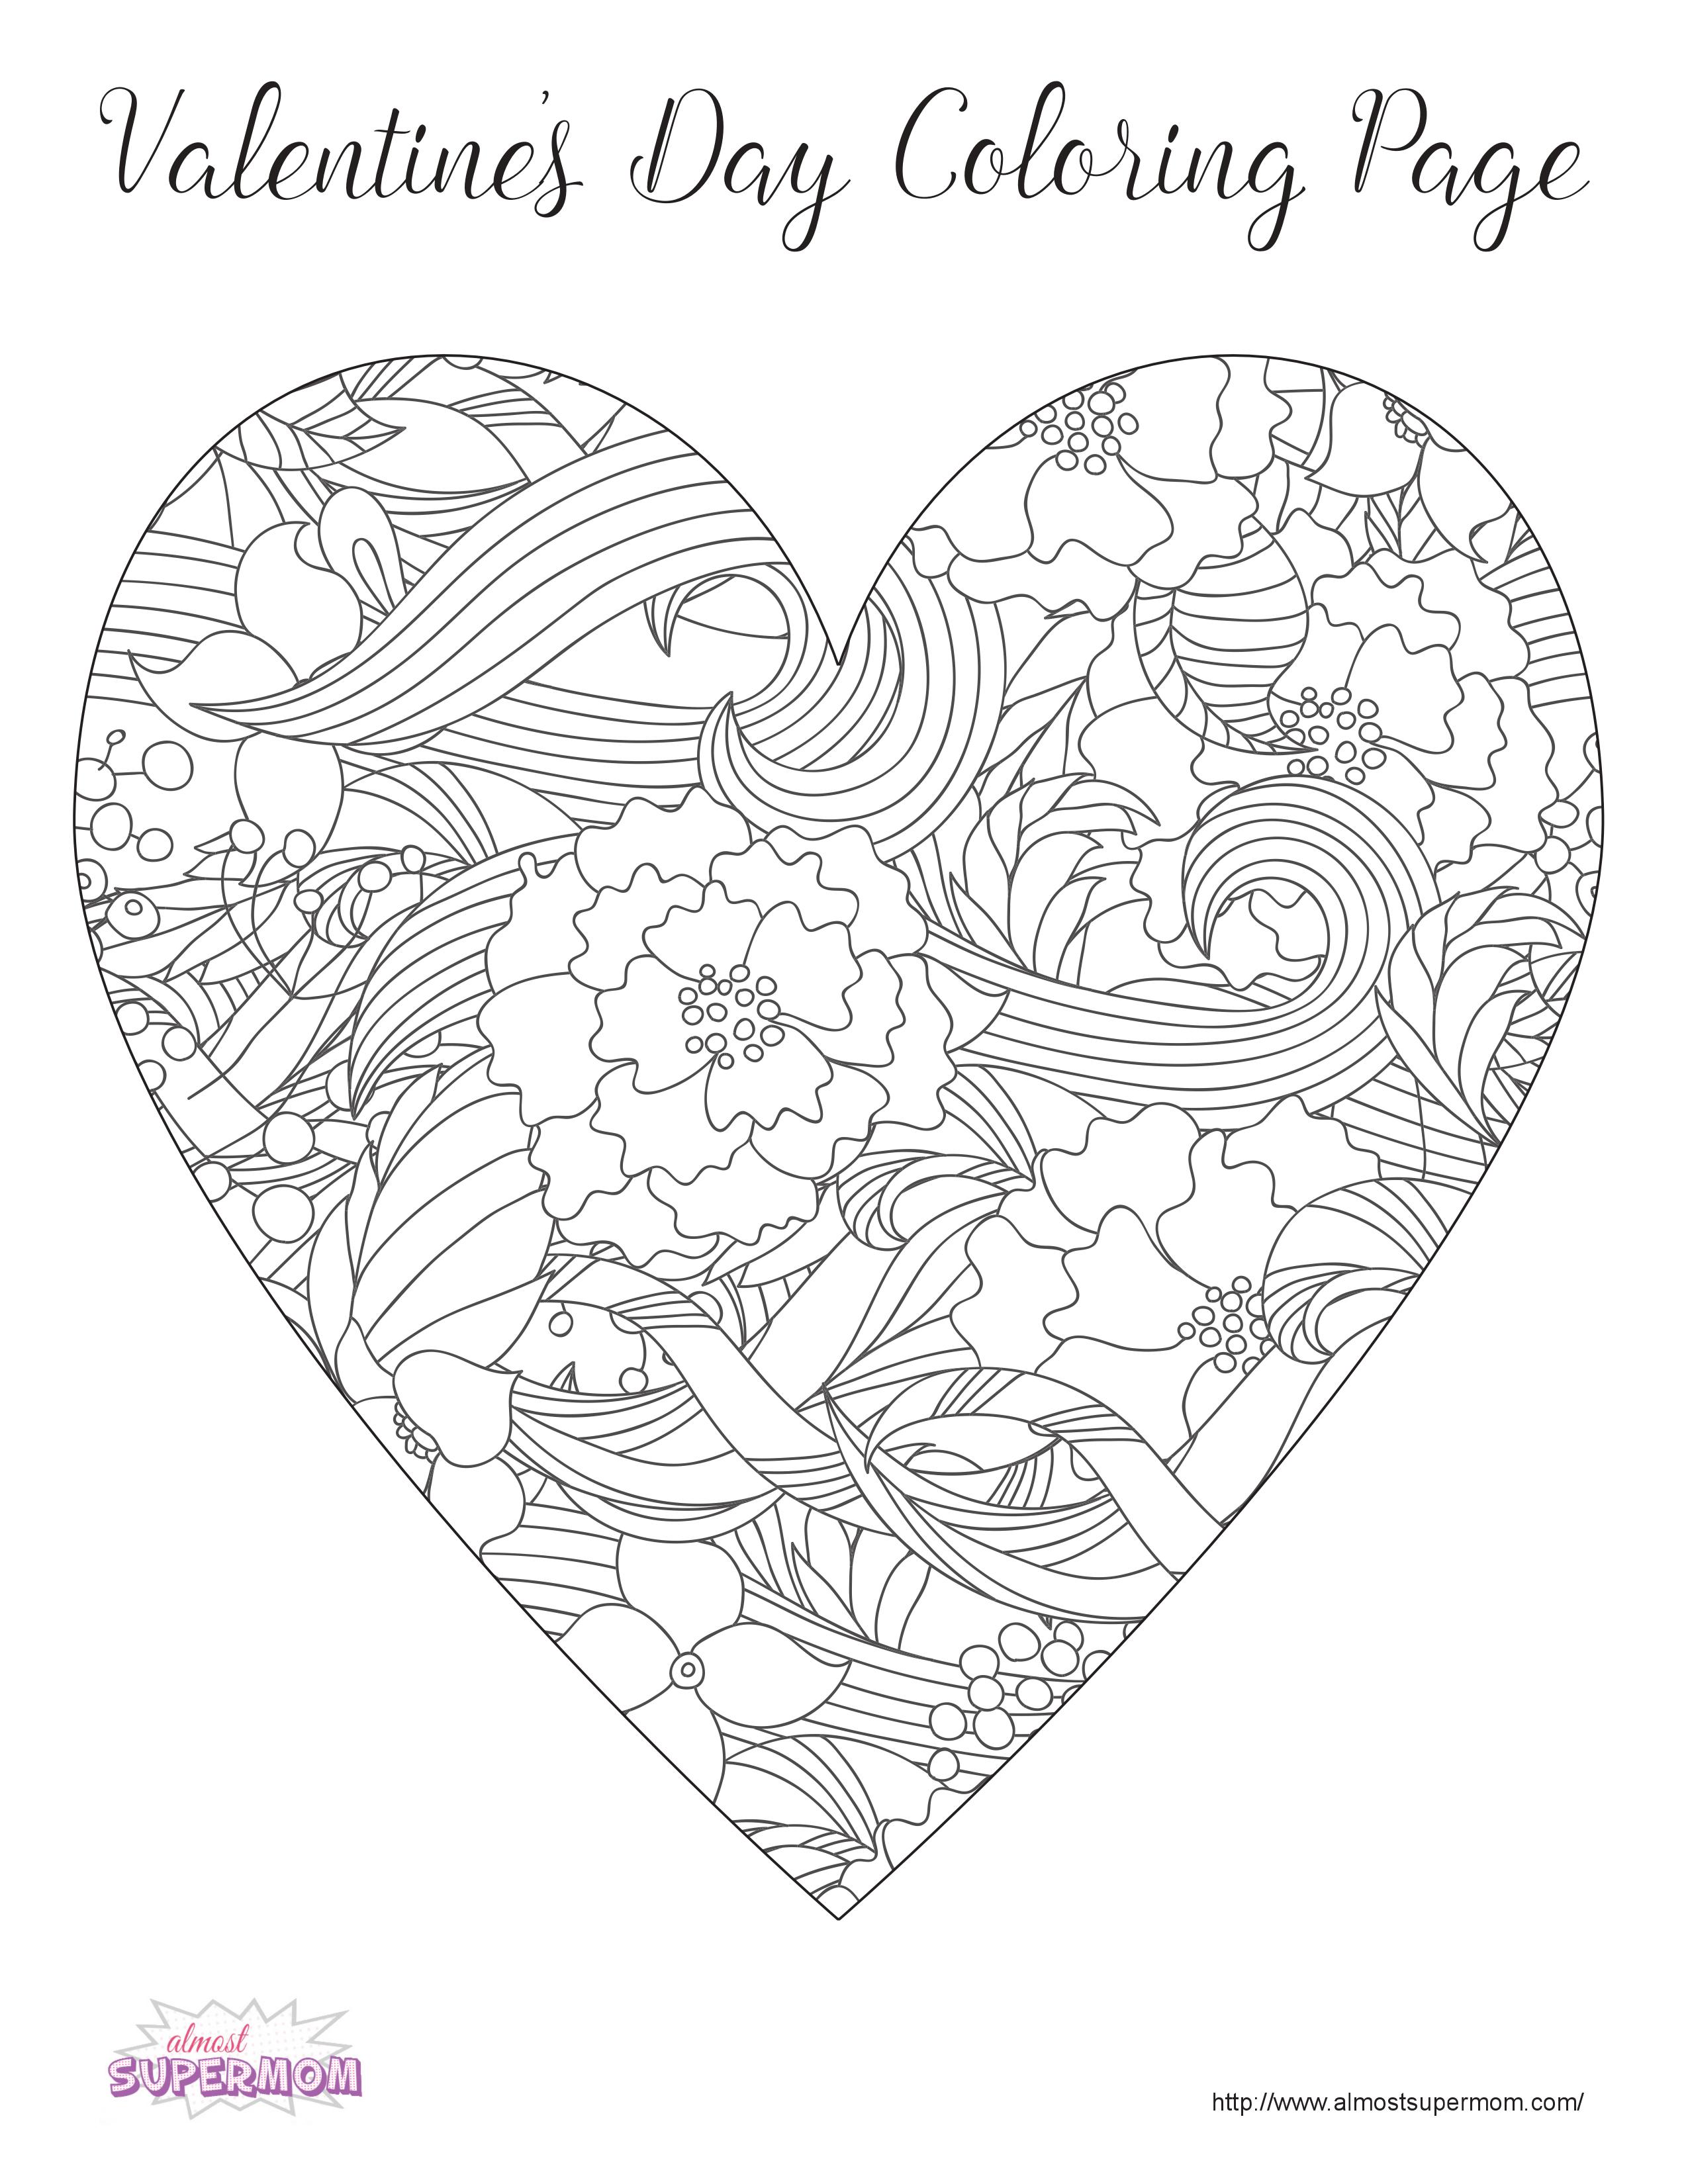 Free valentines day coloring pages for grown ups